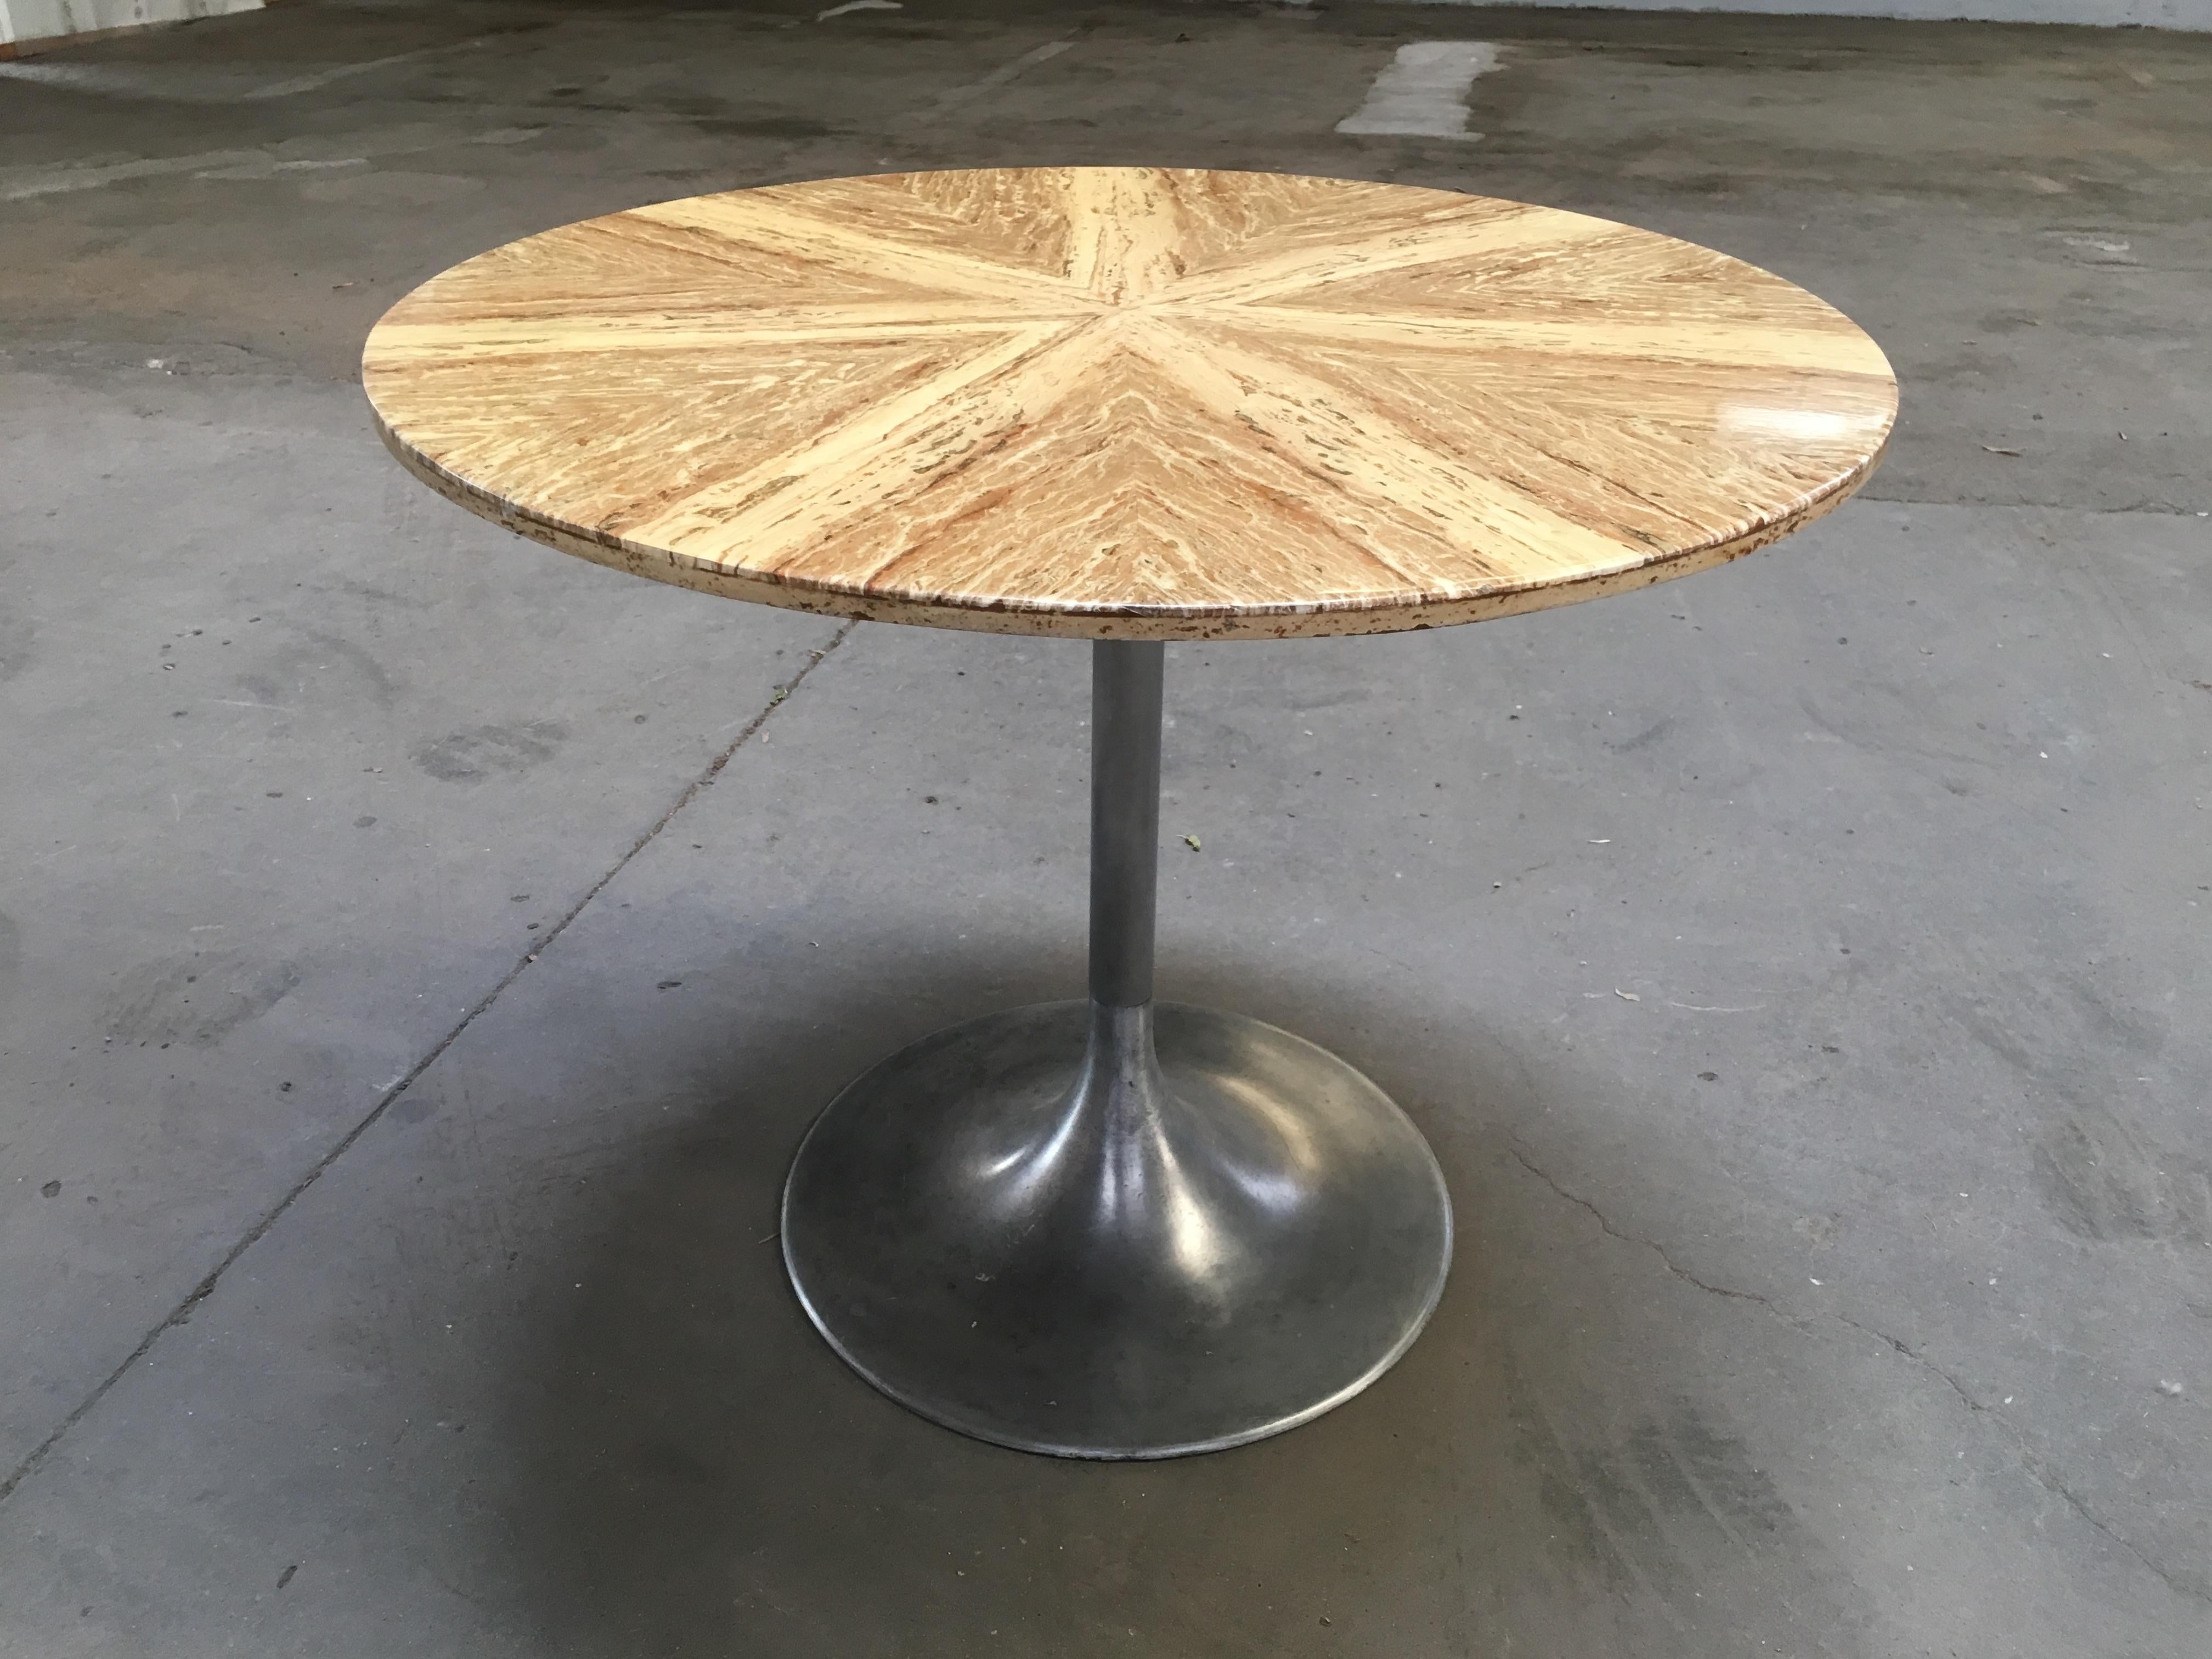 Mid-Century Modern Italian dining or center table with yellow Persian travertine top and aluminum pedestal.
The top of the table presents some signs due to age and use
Cost for restoration on request.